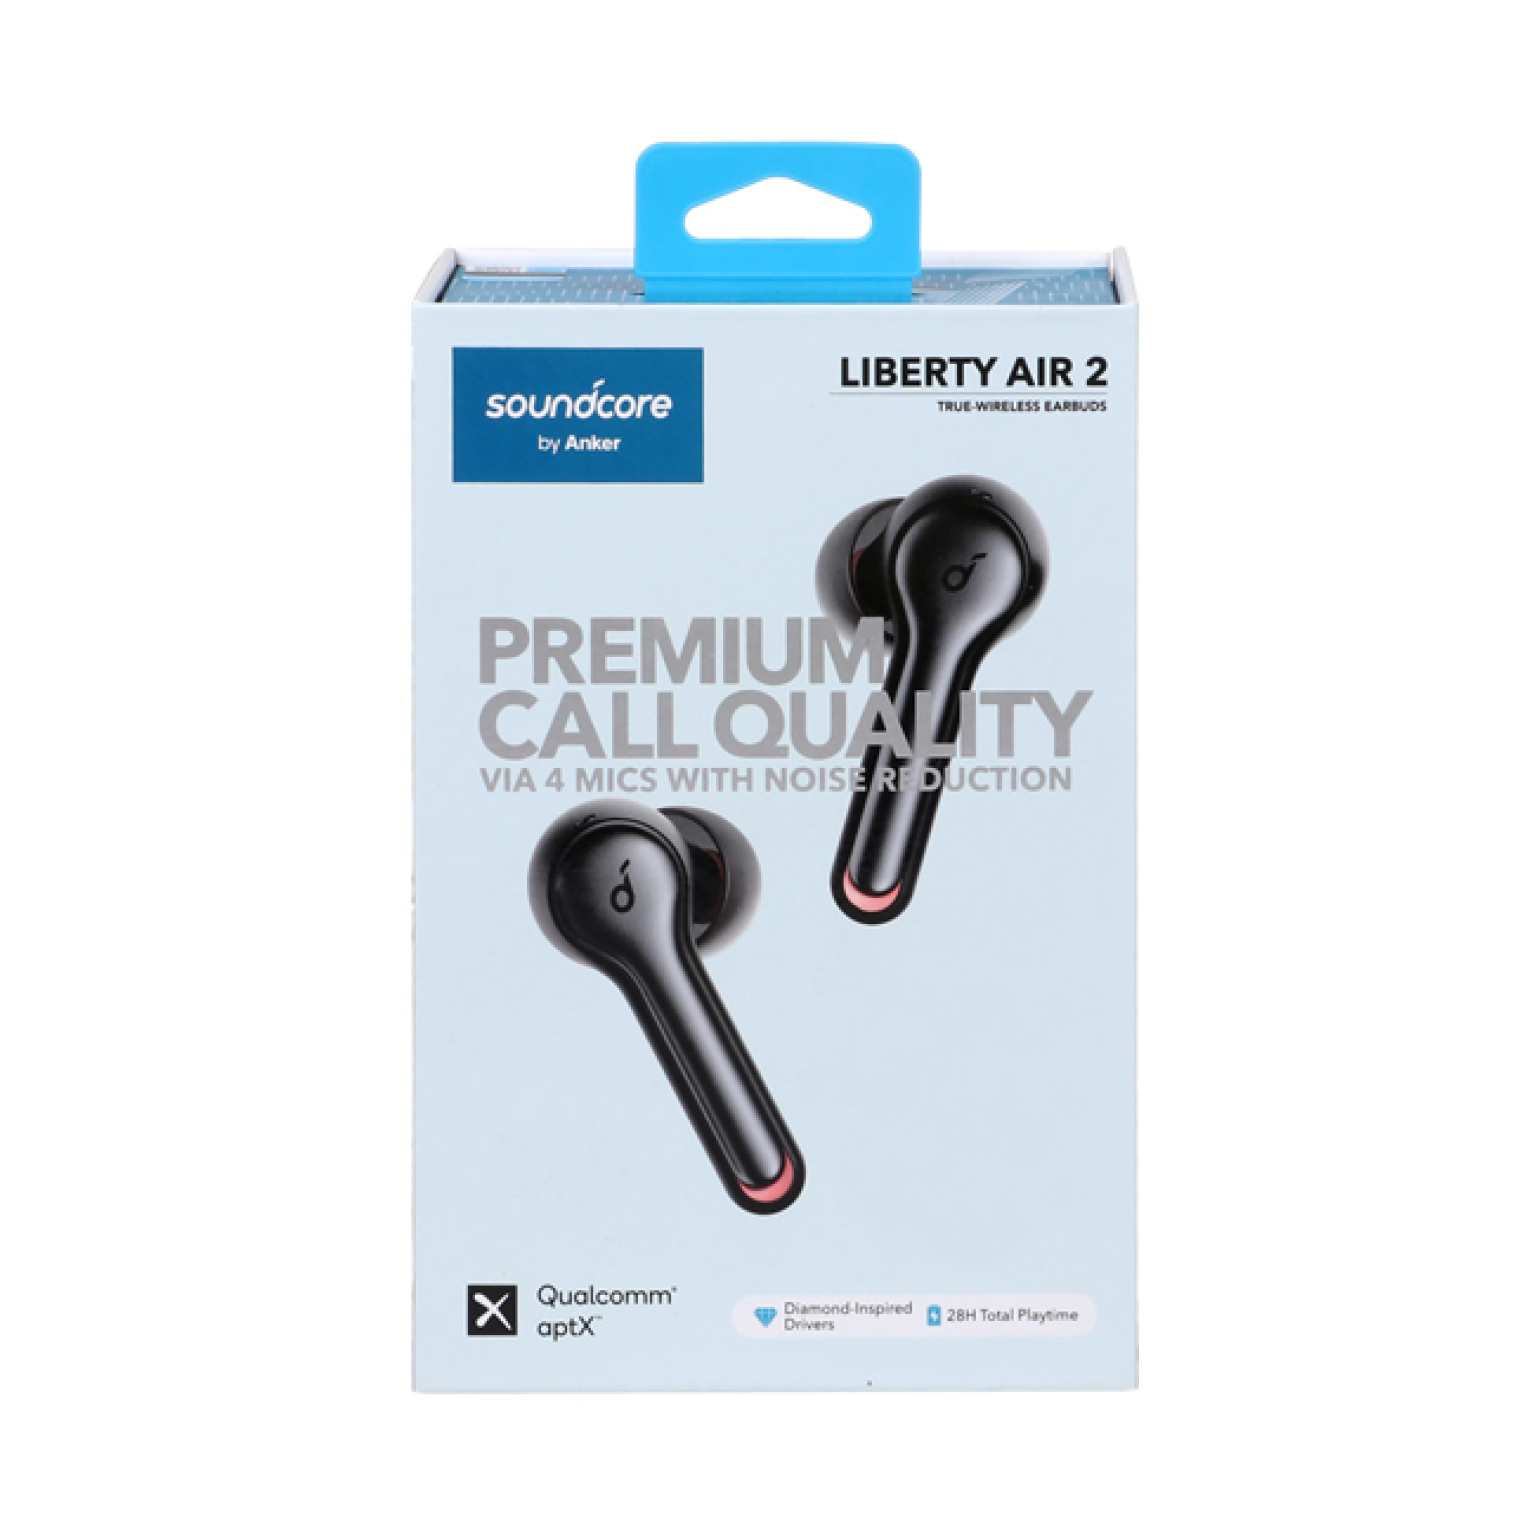 ANKER wireless earbuds LIBERTY AIR 2 A3910 black 3